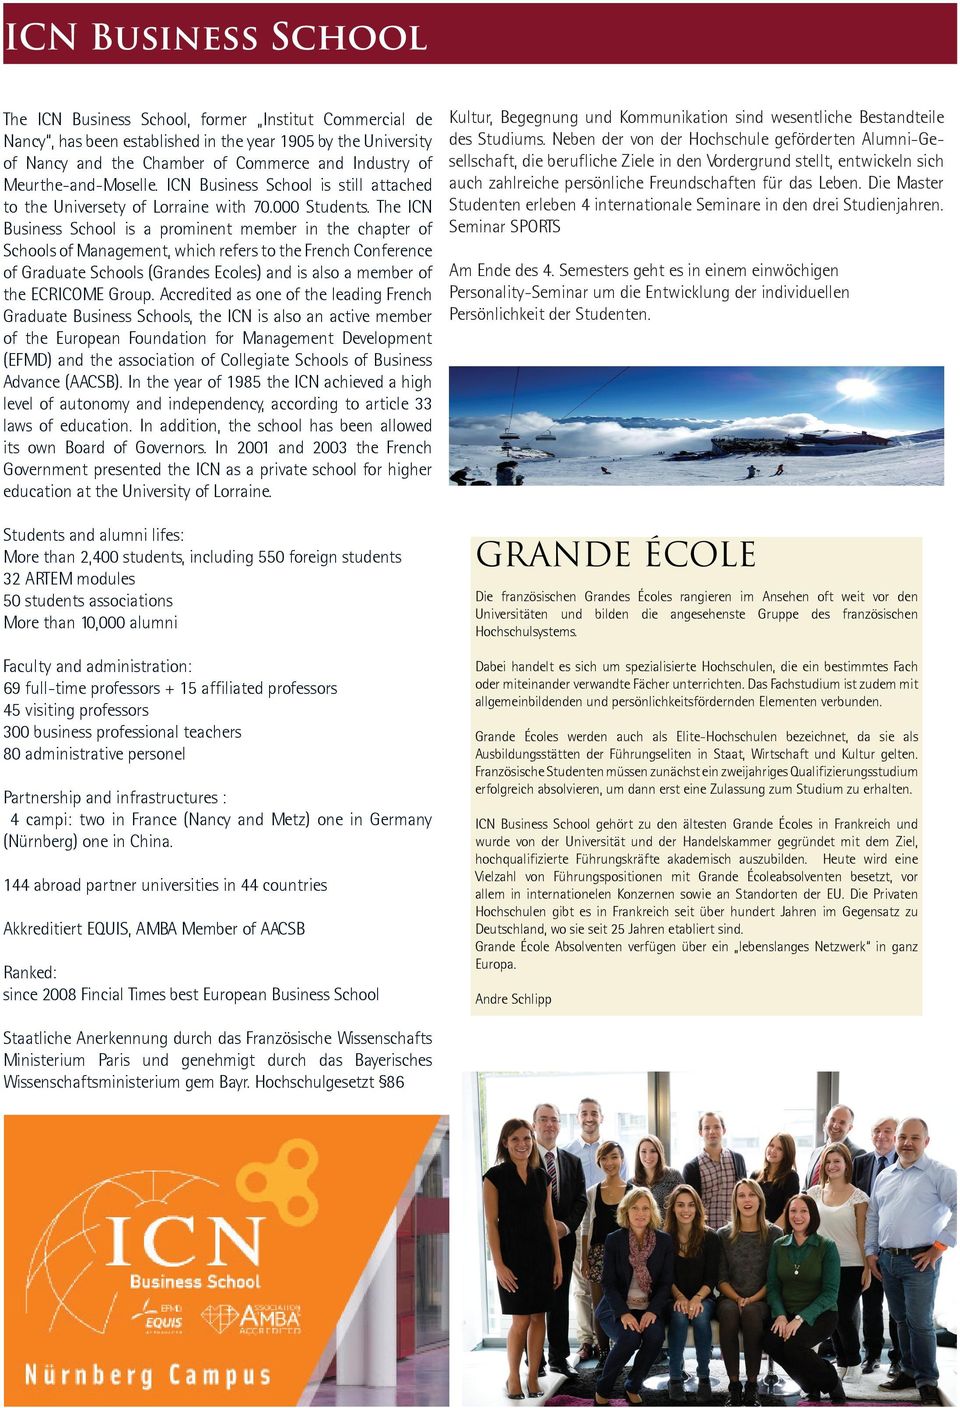 The ICN Business School is a prominent member in the chapter of Schools of Management, which refers to the French Conference of Graduate Schools (Grandes Ecoles) and is also a member of the ECRICOME